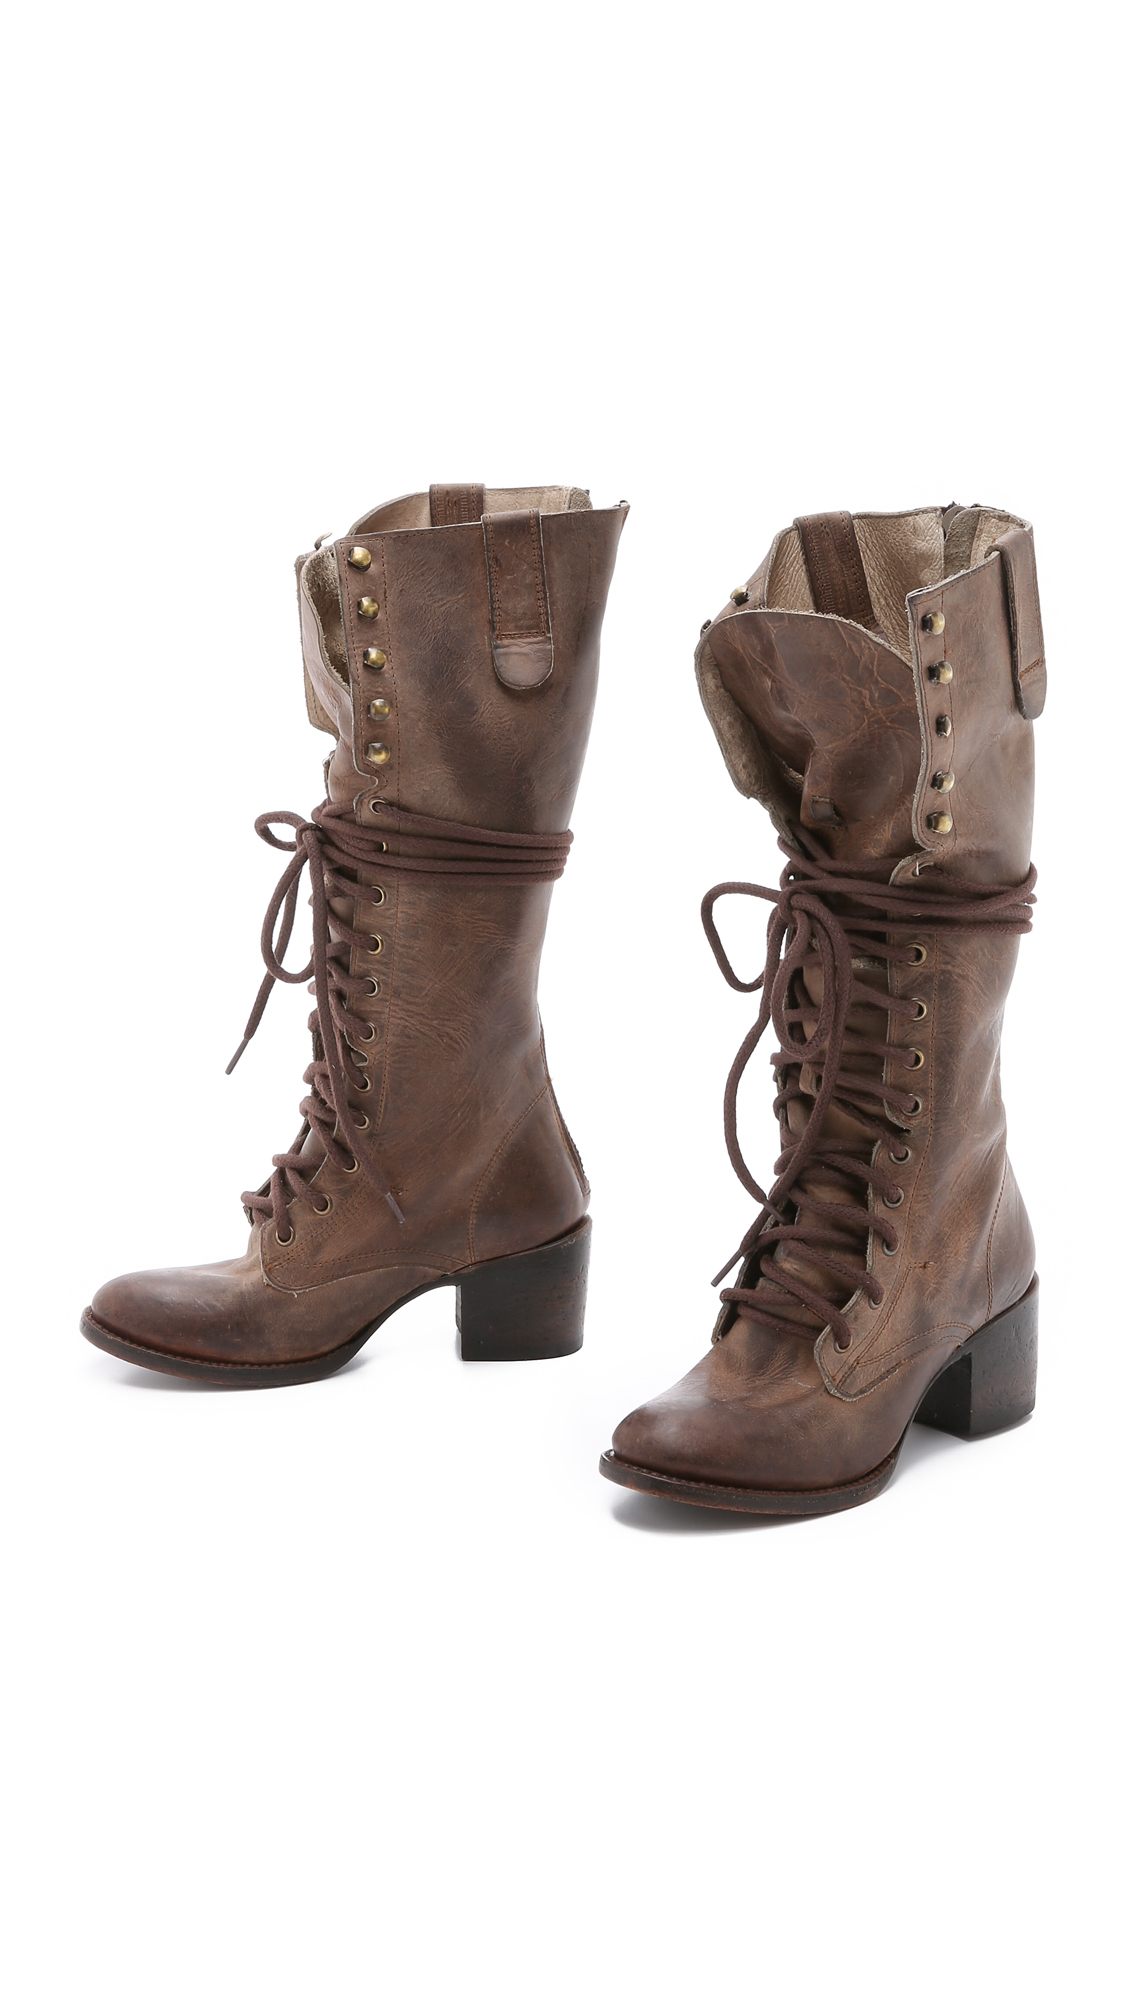 Freebird By Steven Grany Lace Up Boots - Stone in Gray - Lyst